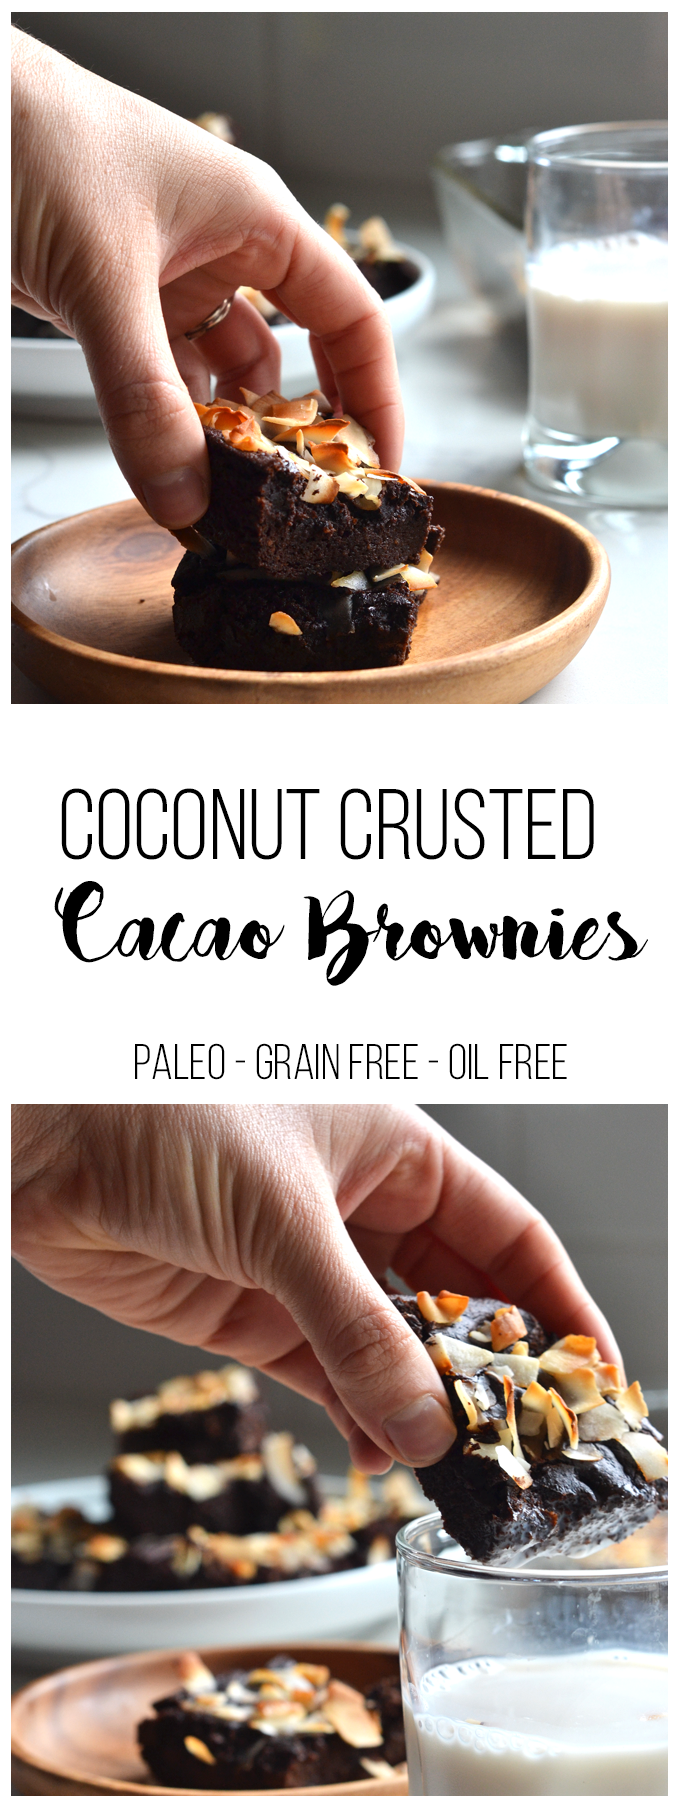 These Coconut Crusted Cacao Brownies are grain free and oil free! The healthy fat comes from avocado and they are sweetened with maple syrup!